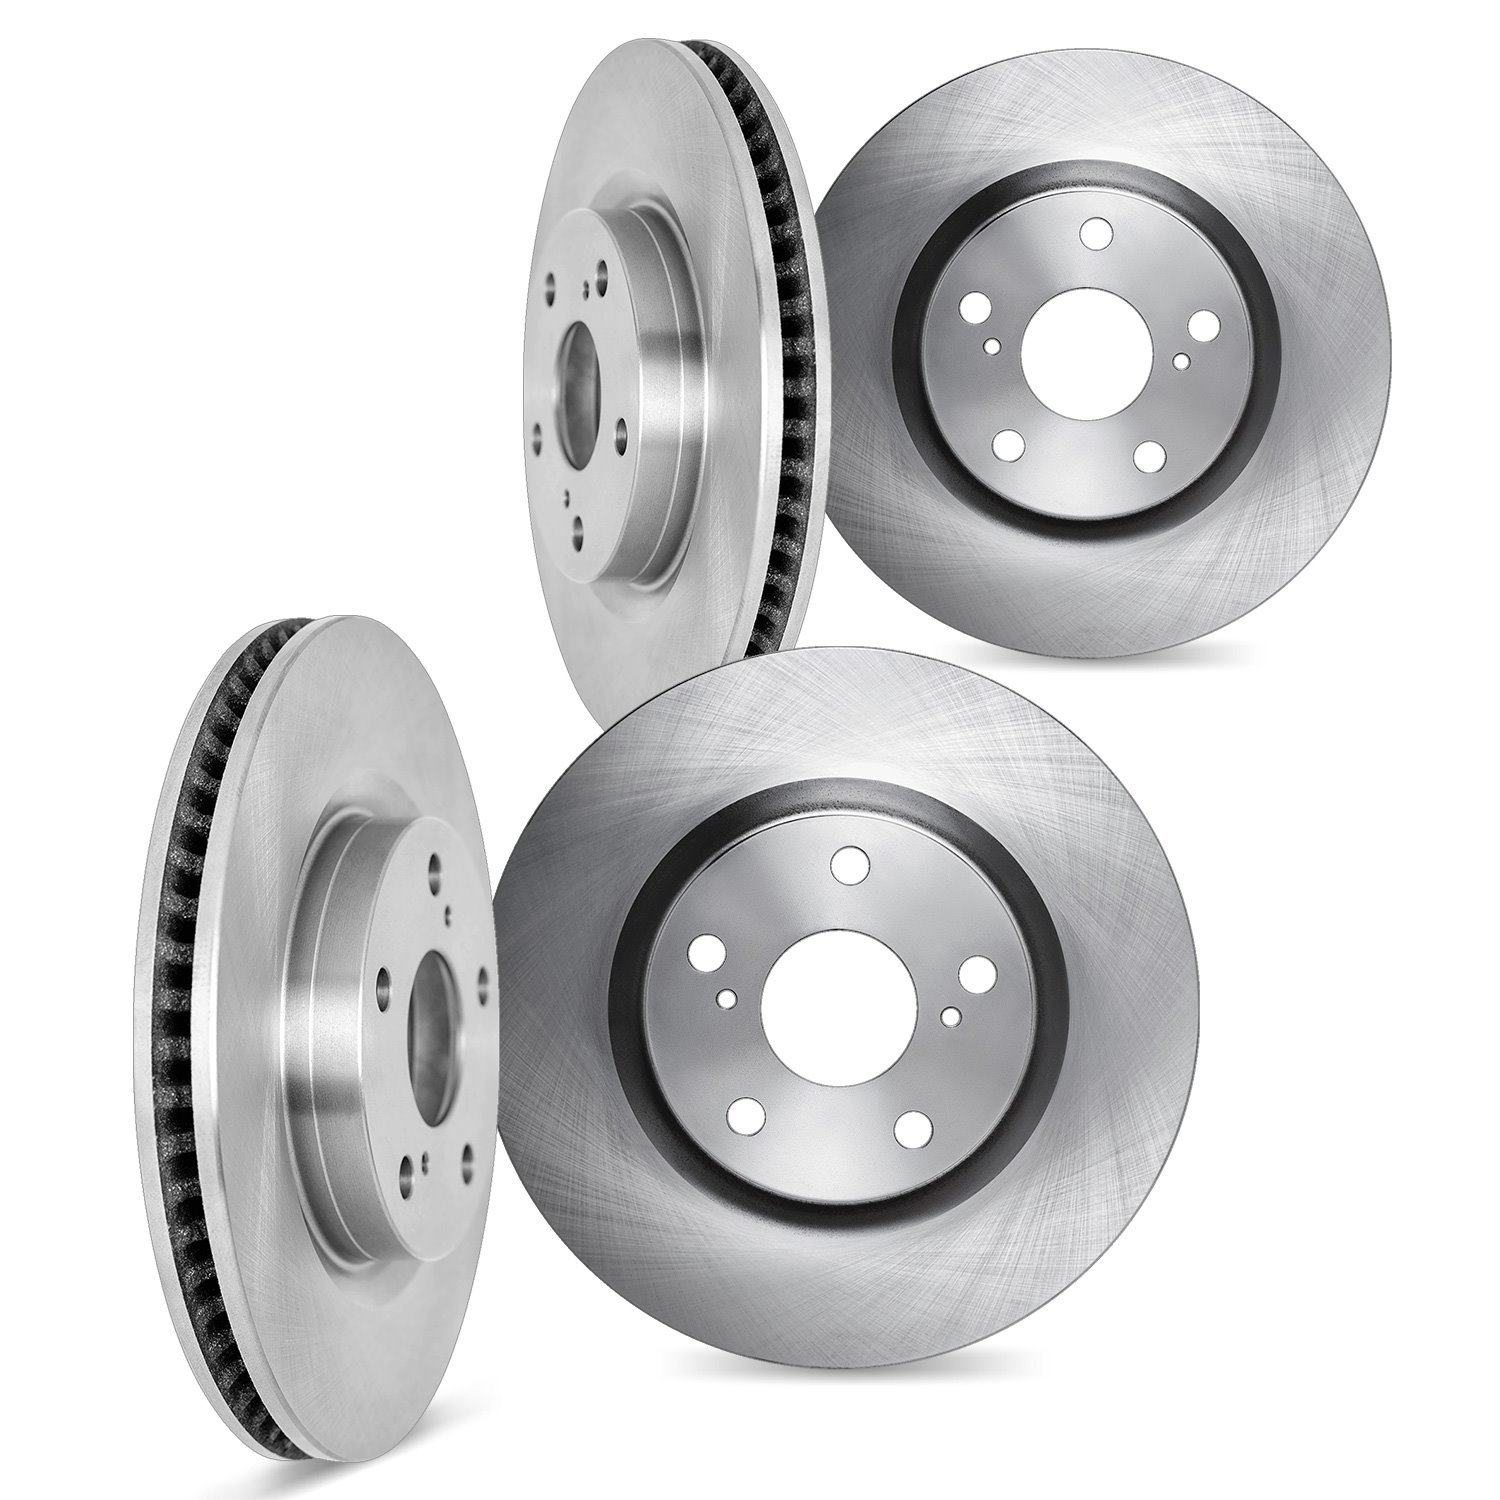 6004-69000 Brake Rotors, 2004-2018 Bentley, Position: Front and Rear